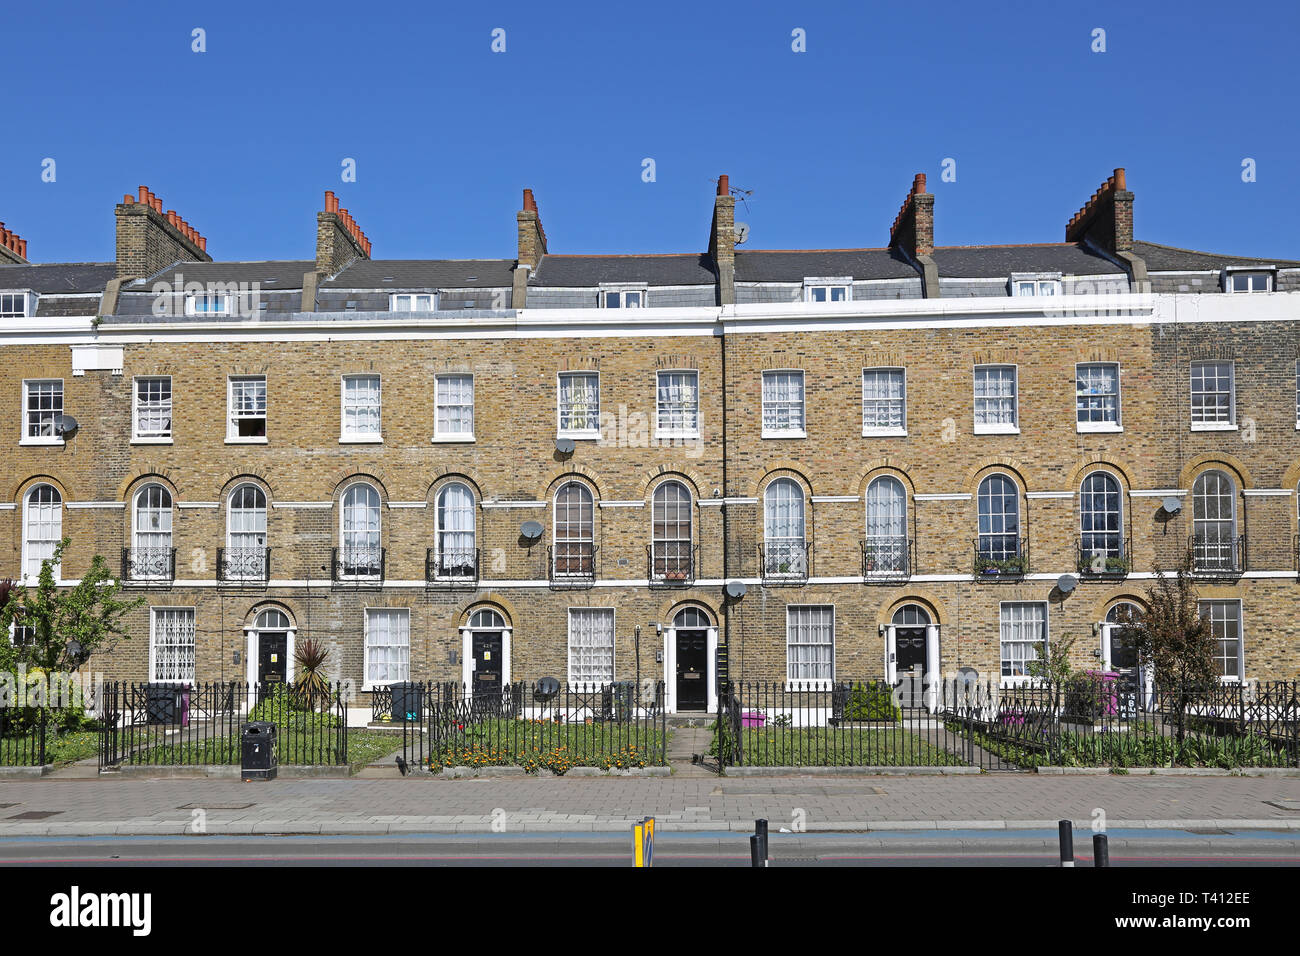 Elegant terrace of Georgian houses on Bow Road in London's East End, UK. Corner of Tredegar Square. Most now converted to flats. Stock Photo